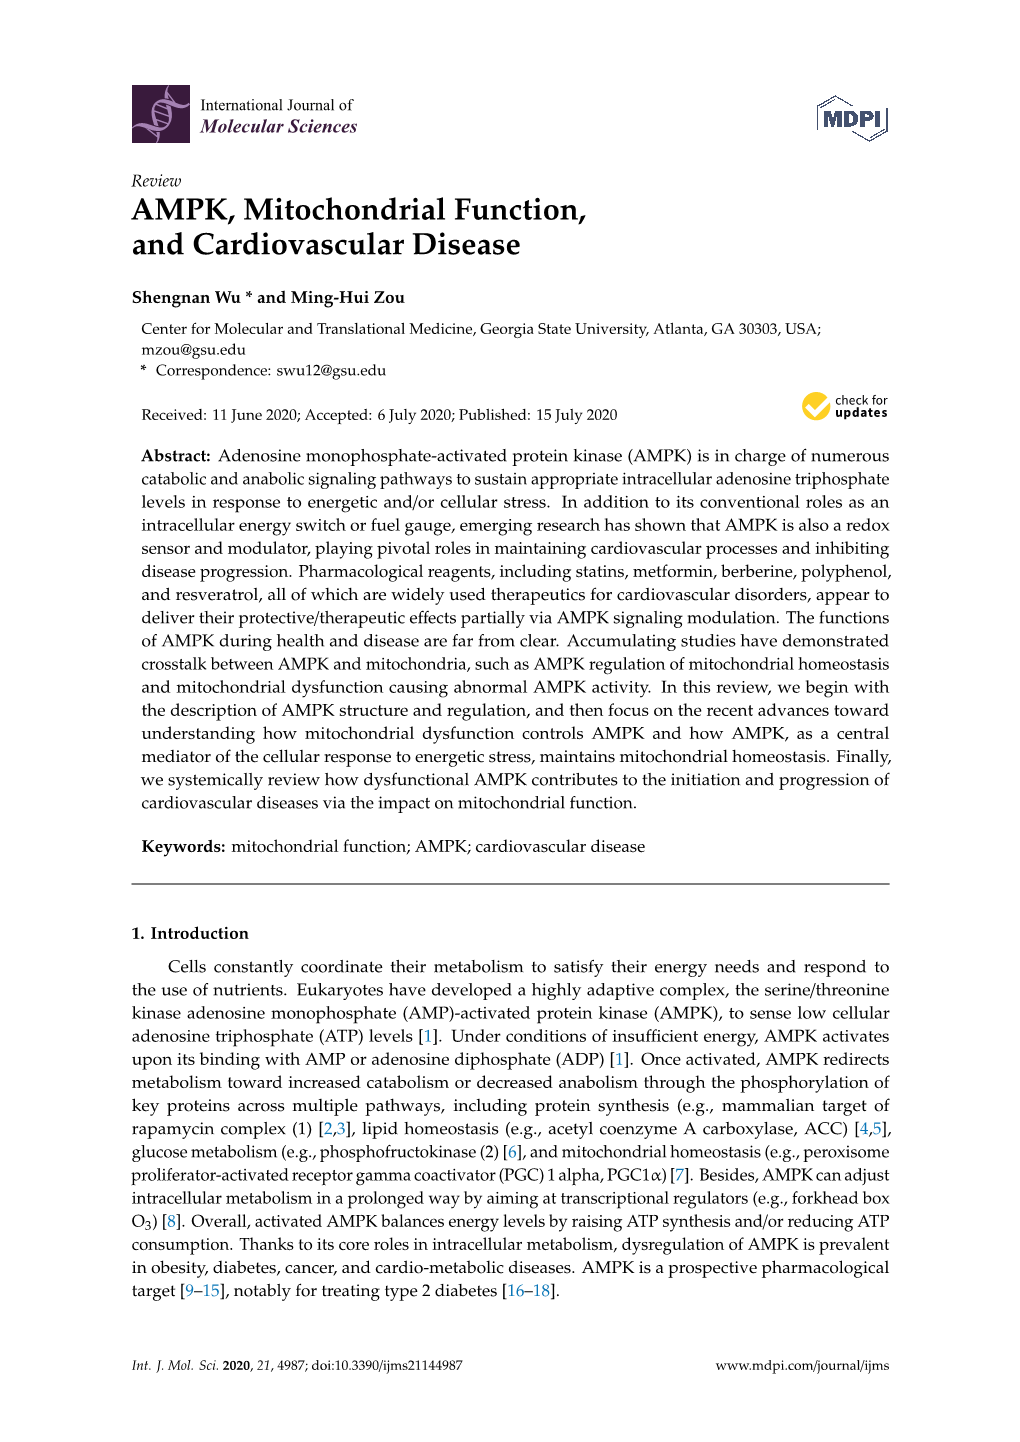 AMPK, Mitochondrial Function, and Cardiovascular Disease